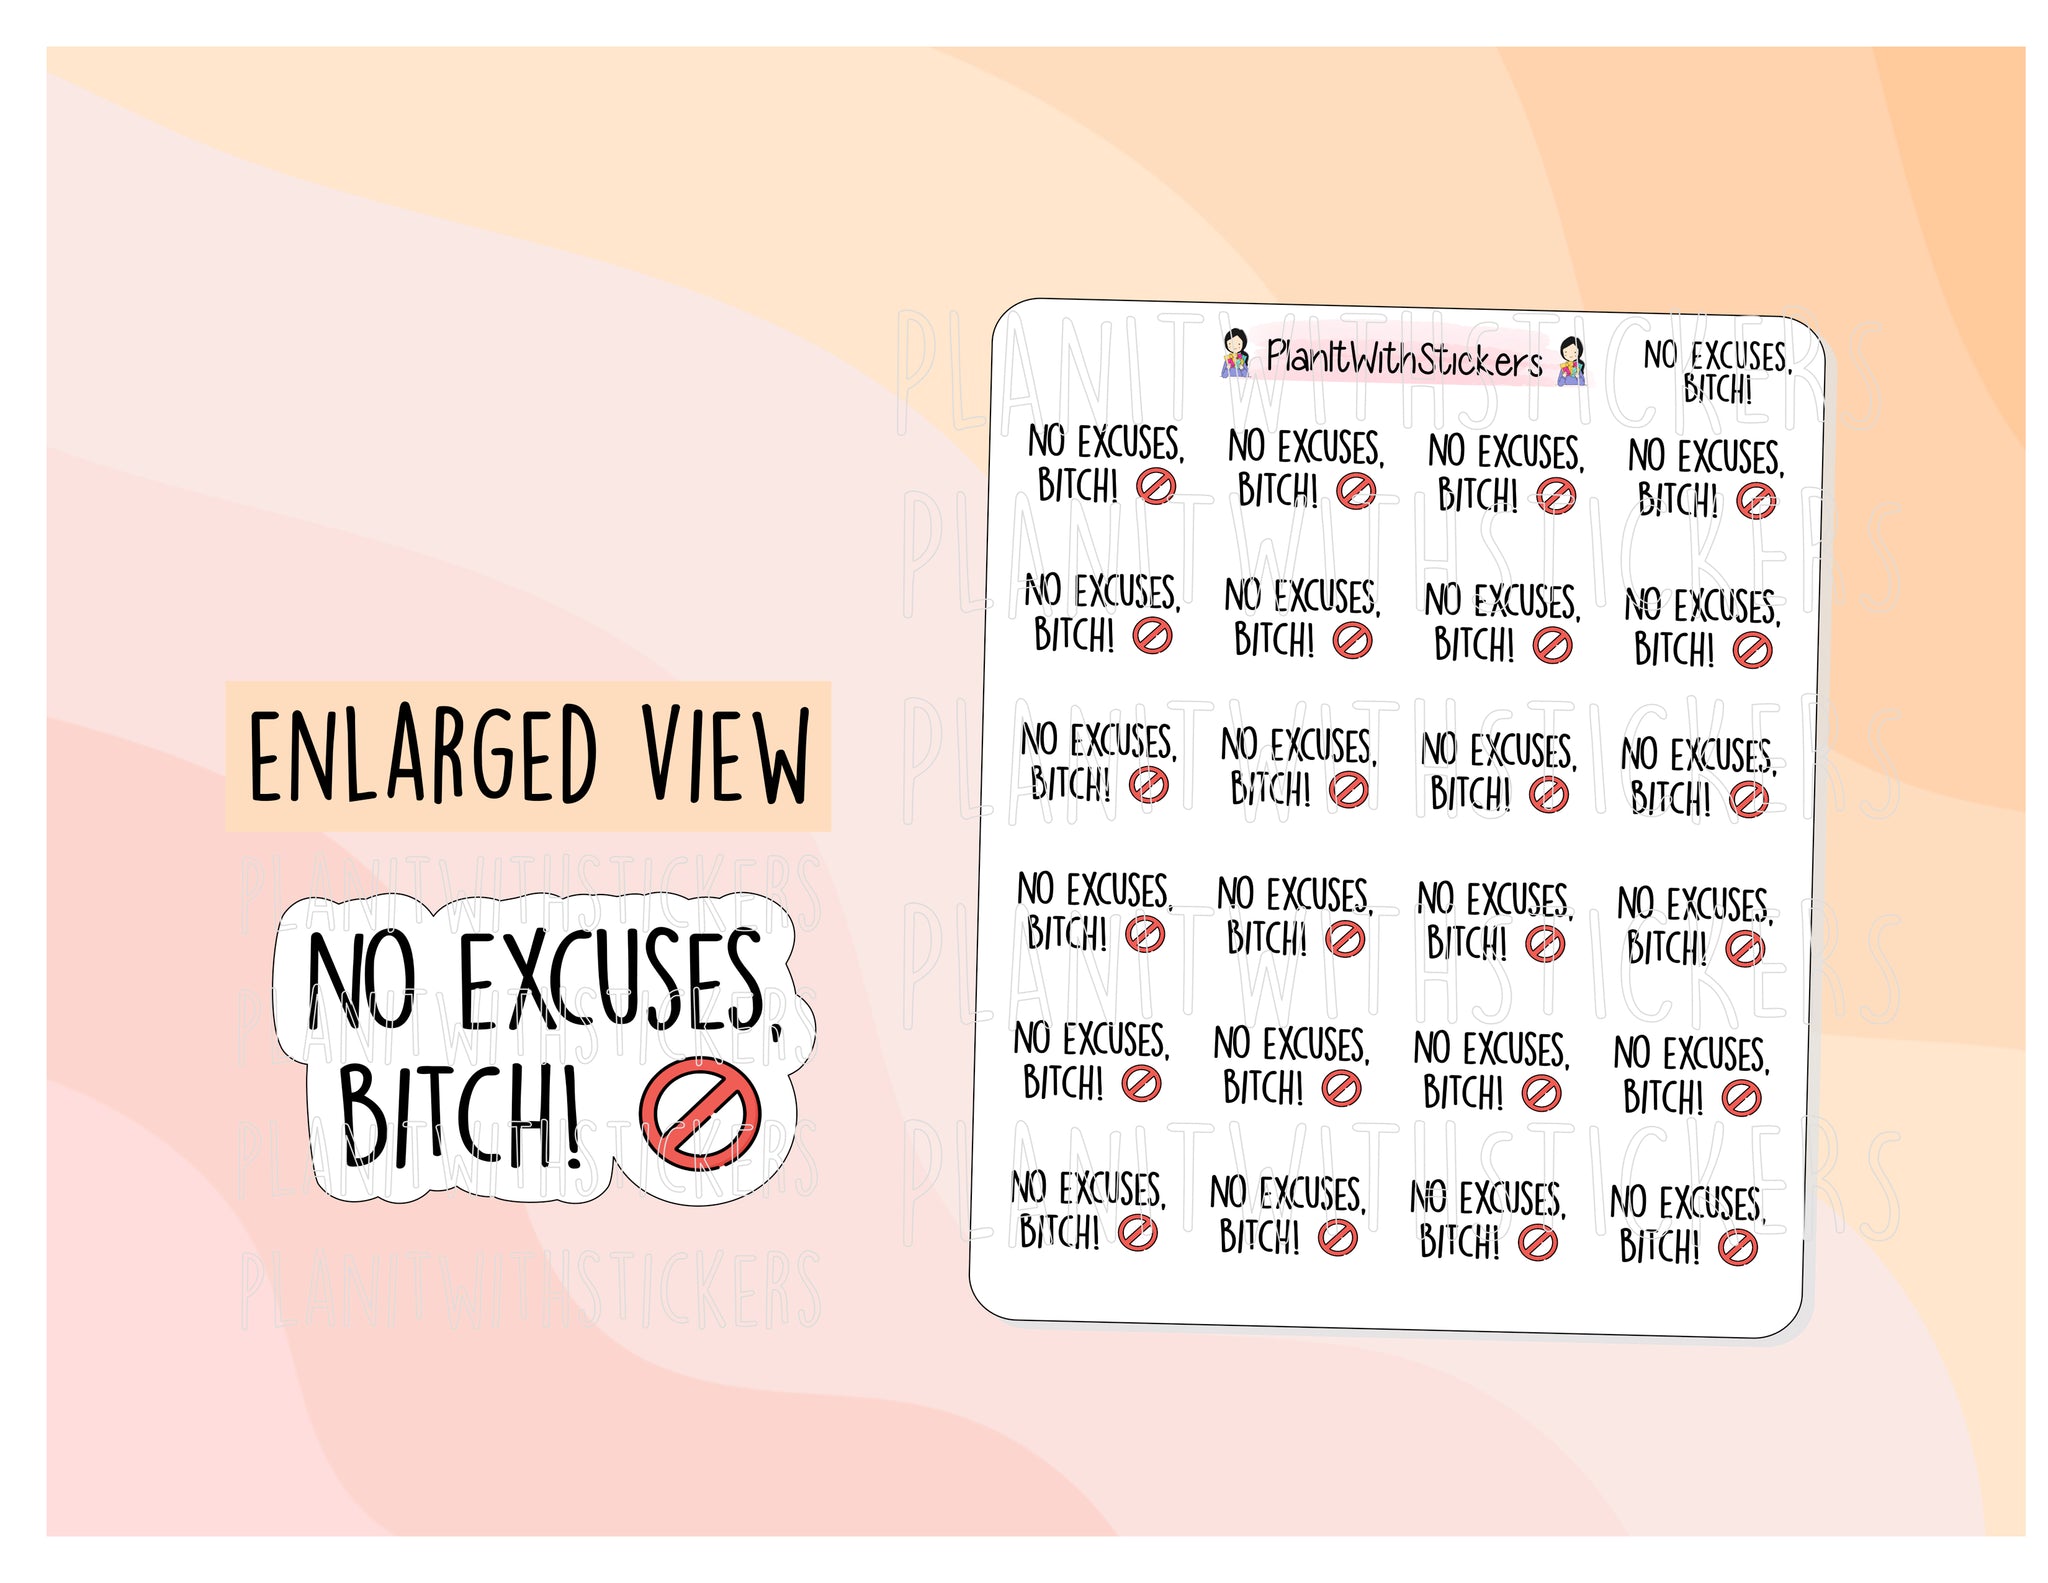 No Excuses, Bitch! Potty Mouth / Self Care Sticker